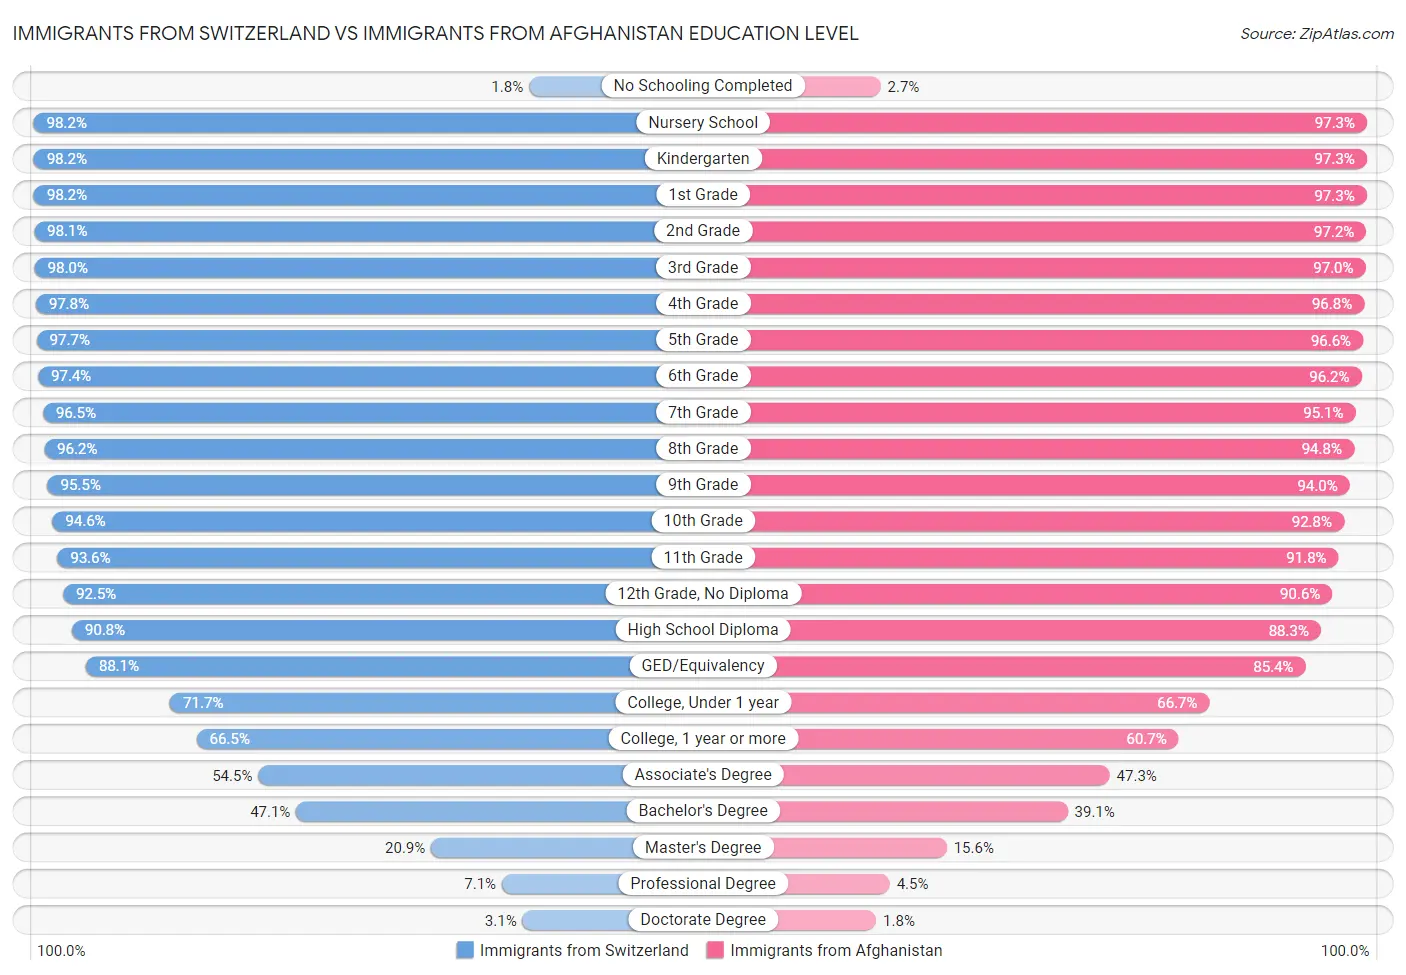 Immigrants from Switzerland vs Immigrants from Afghanistan Education Level